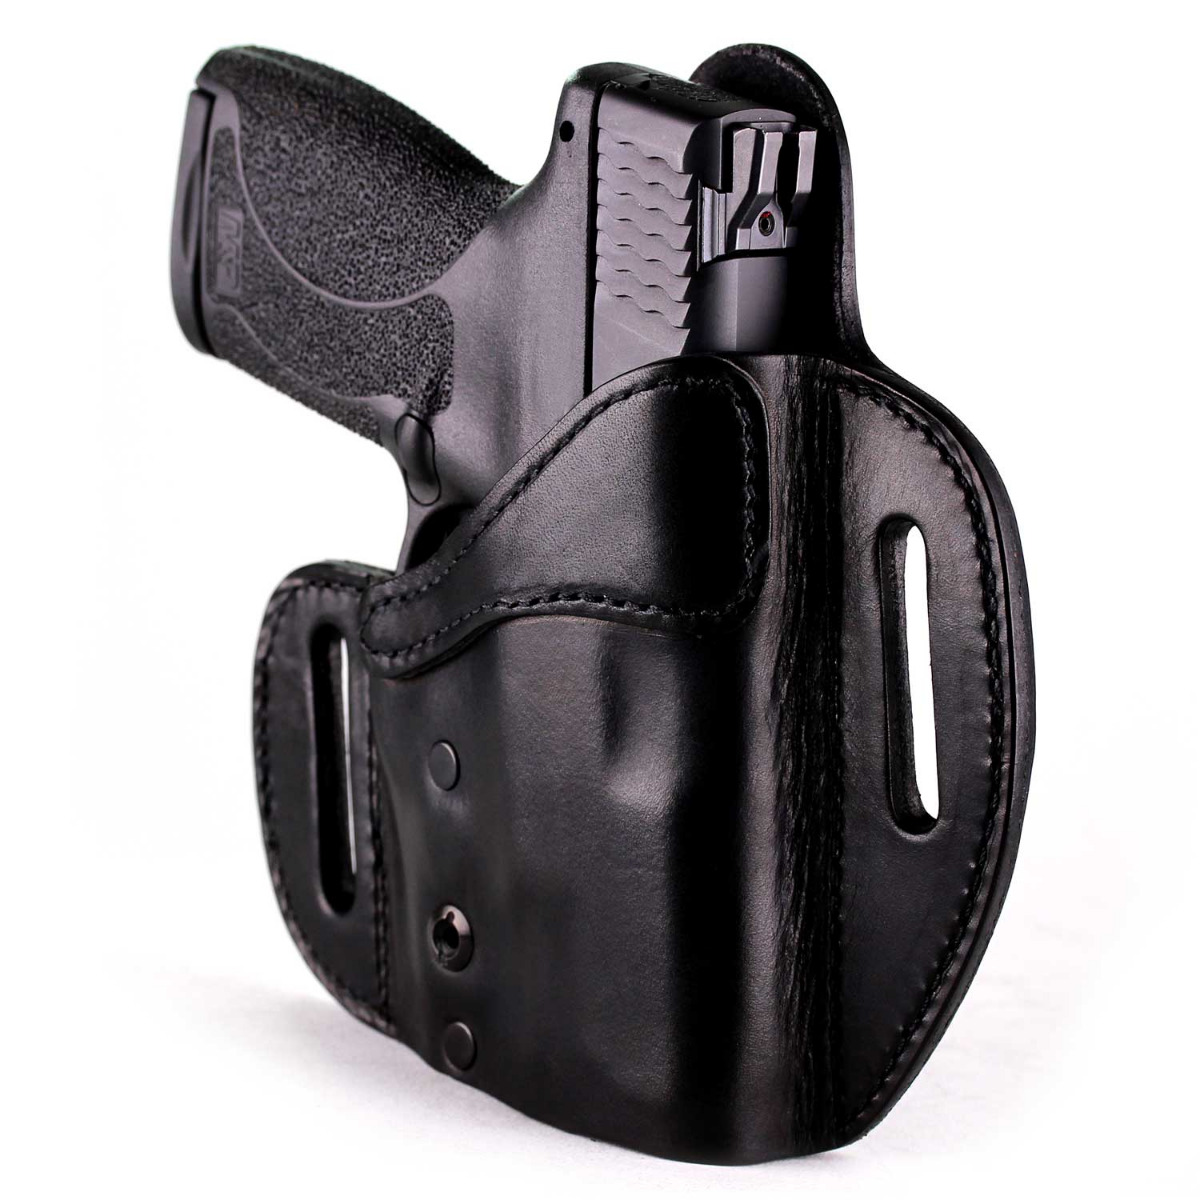 Black right handed leather gun holster for Ruger Security-9 Compact 